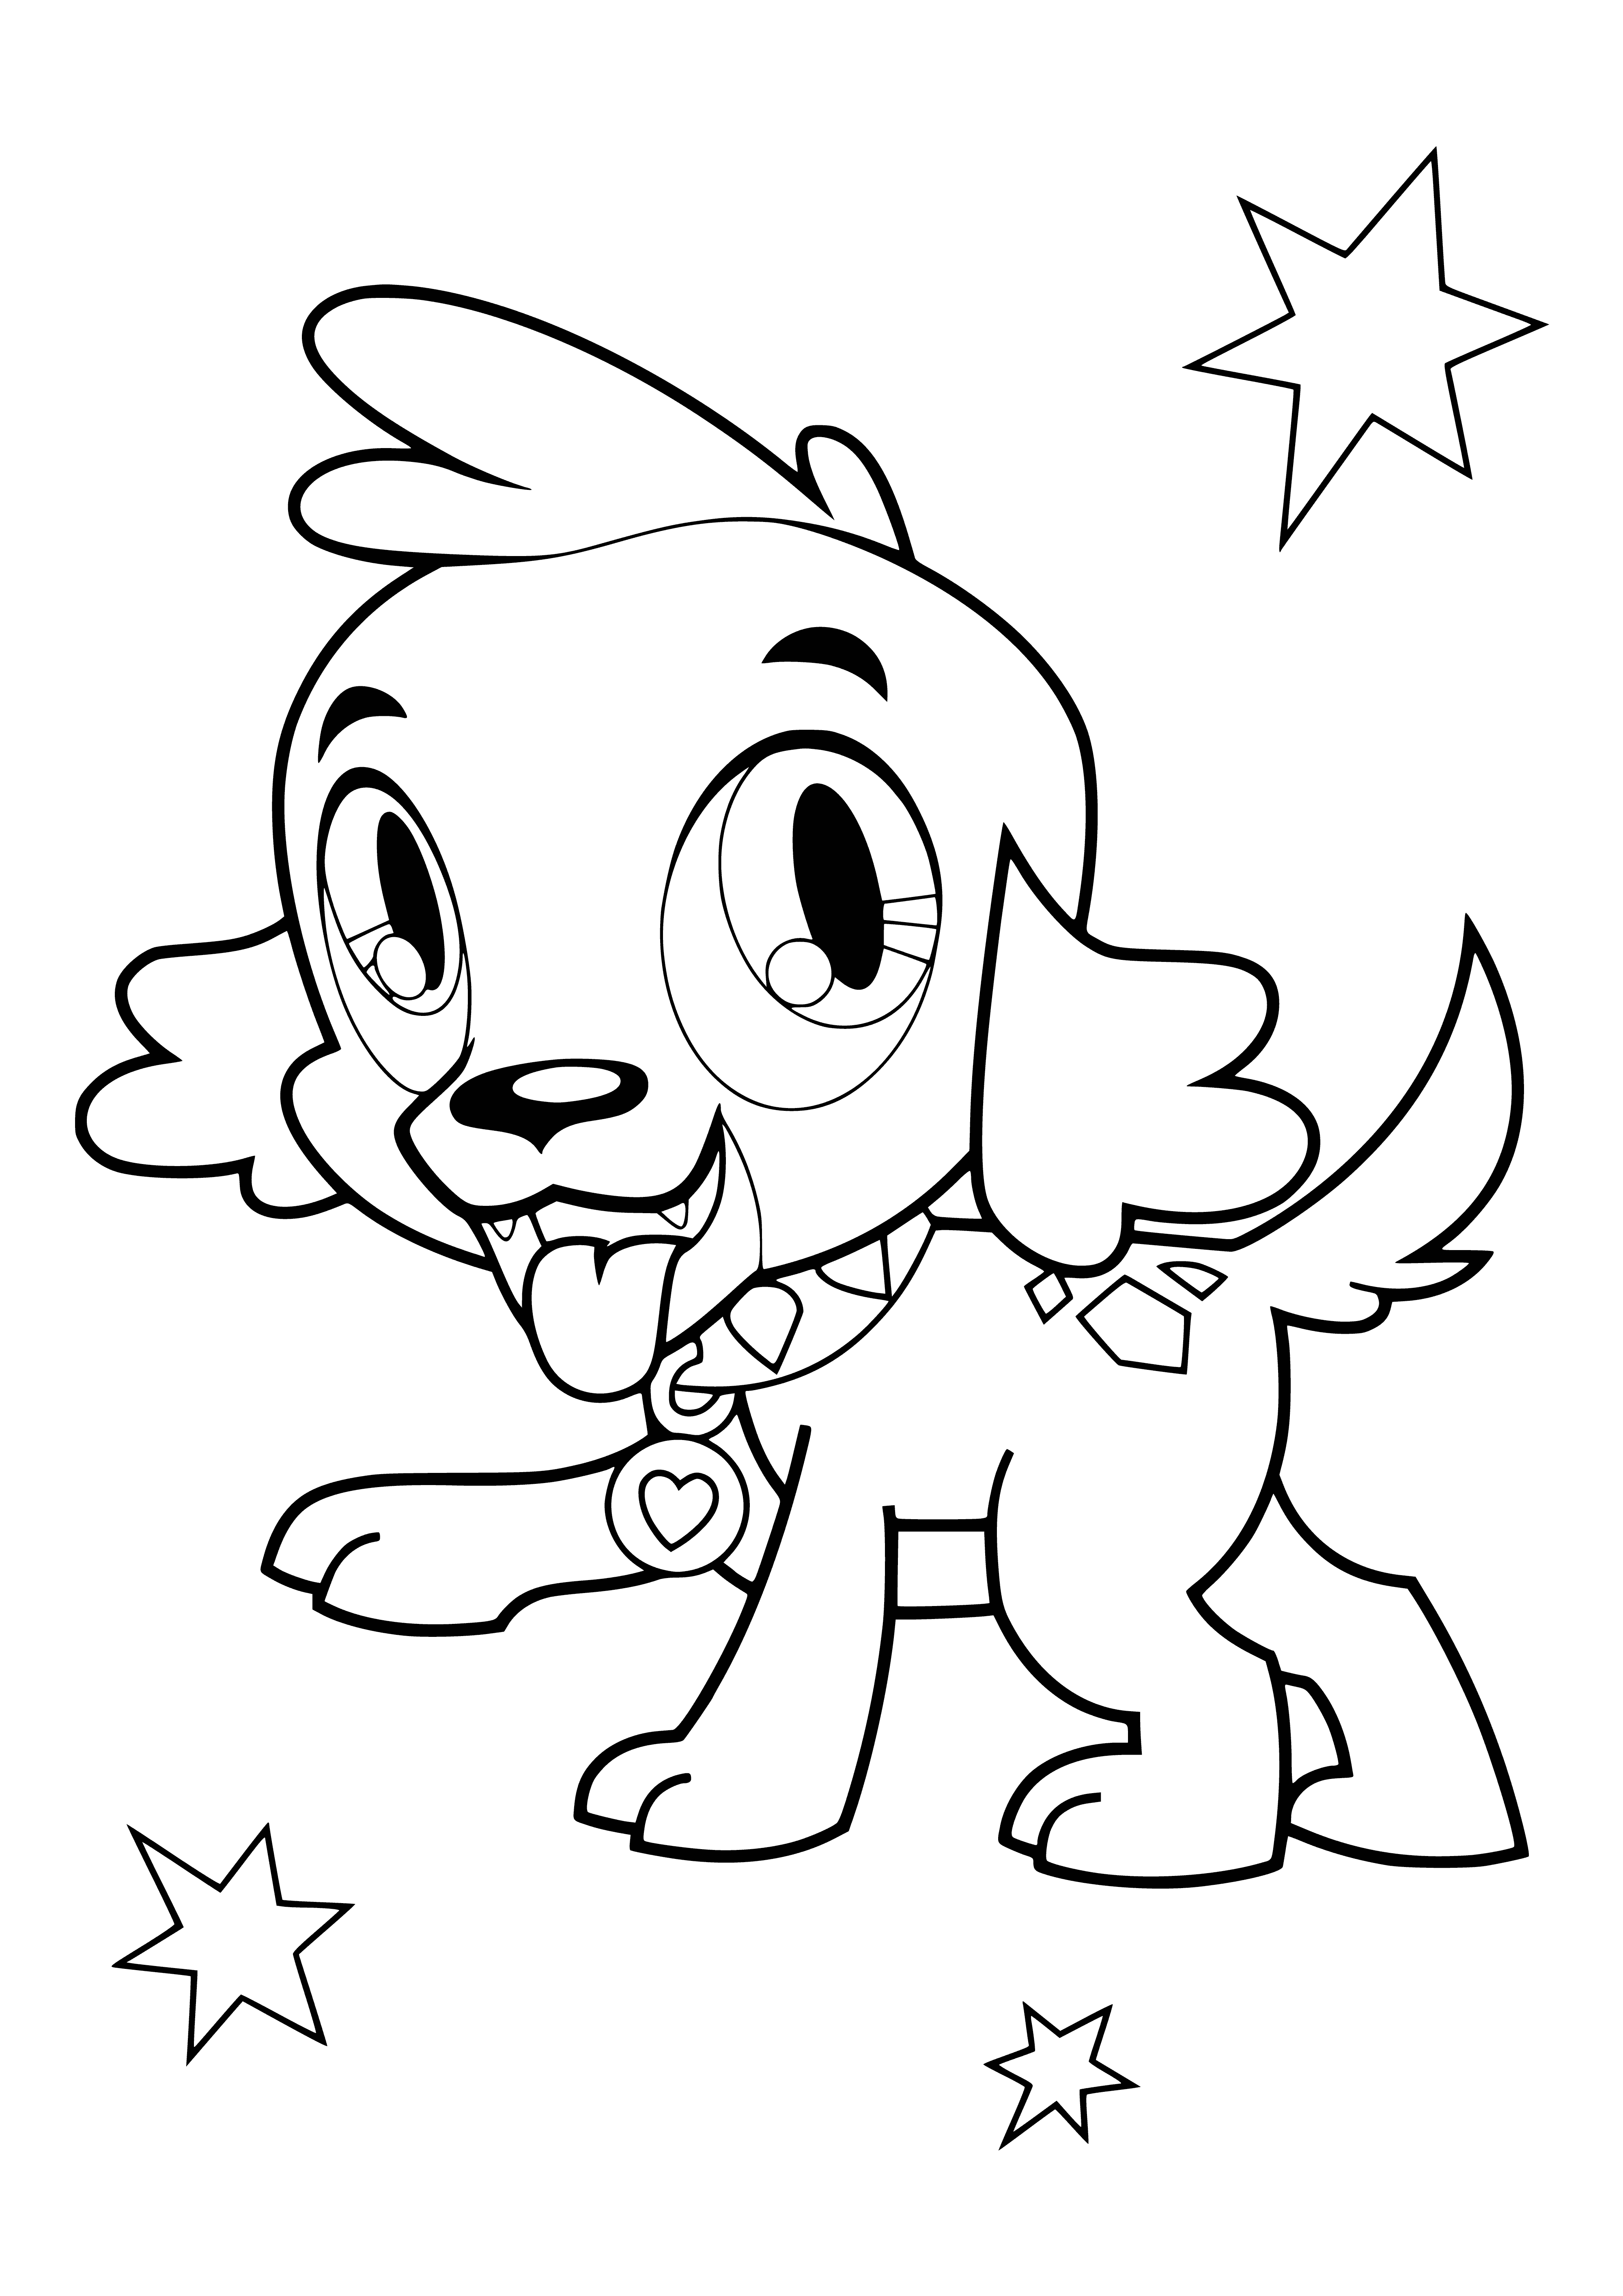 coloring page: The Equestria Girls stand in line with the smiling Spy the Dog in the front showing off his blue bandana.